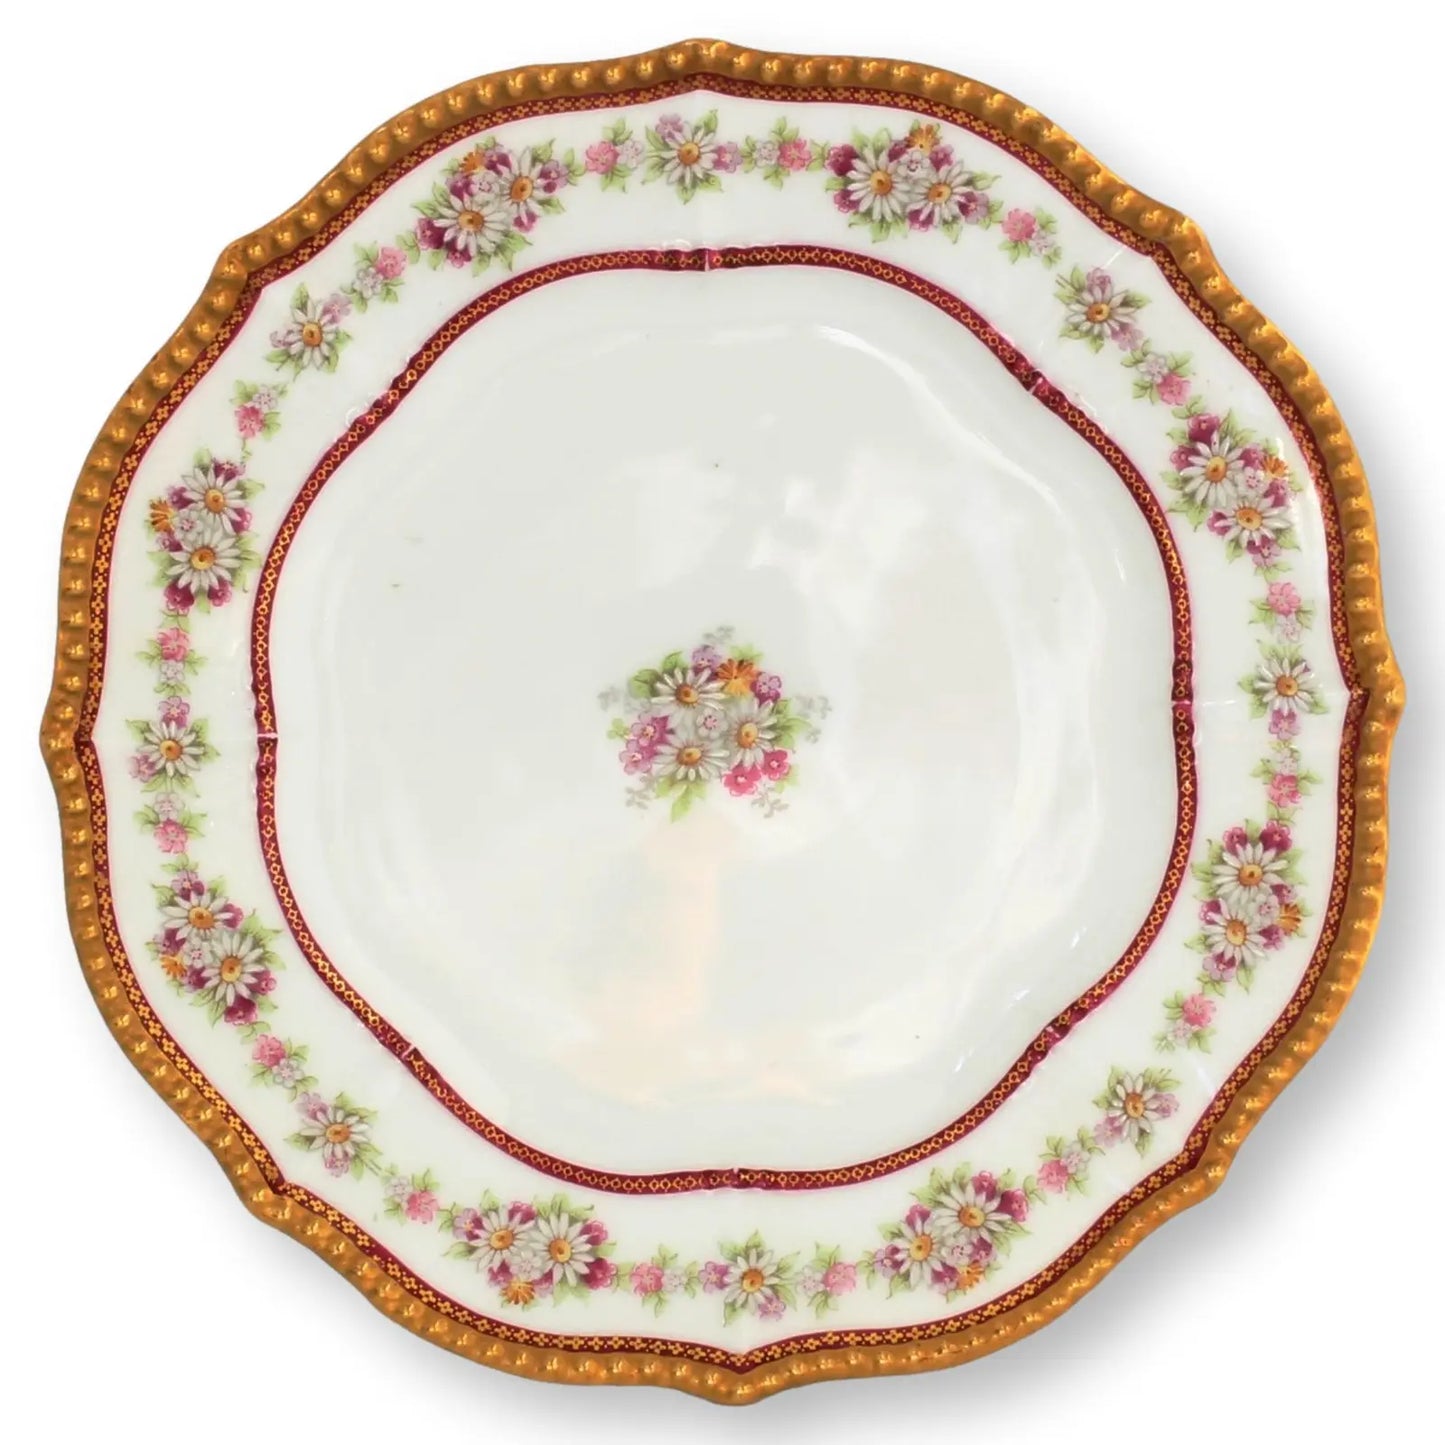 Antique French Limoges Plates, Set of 10